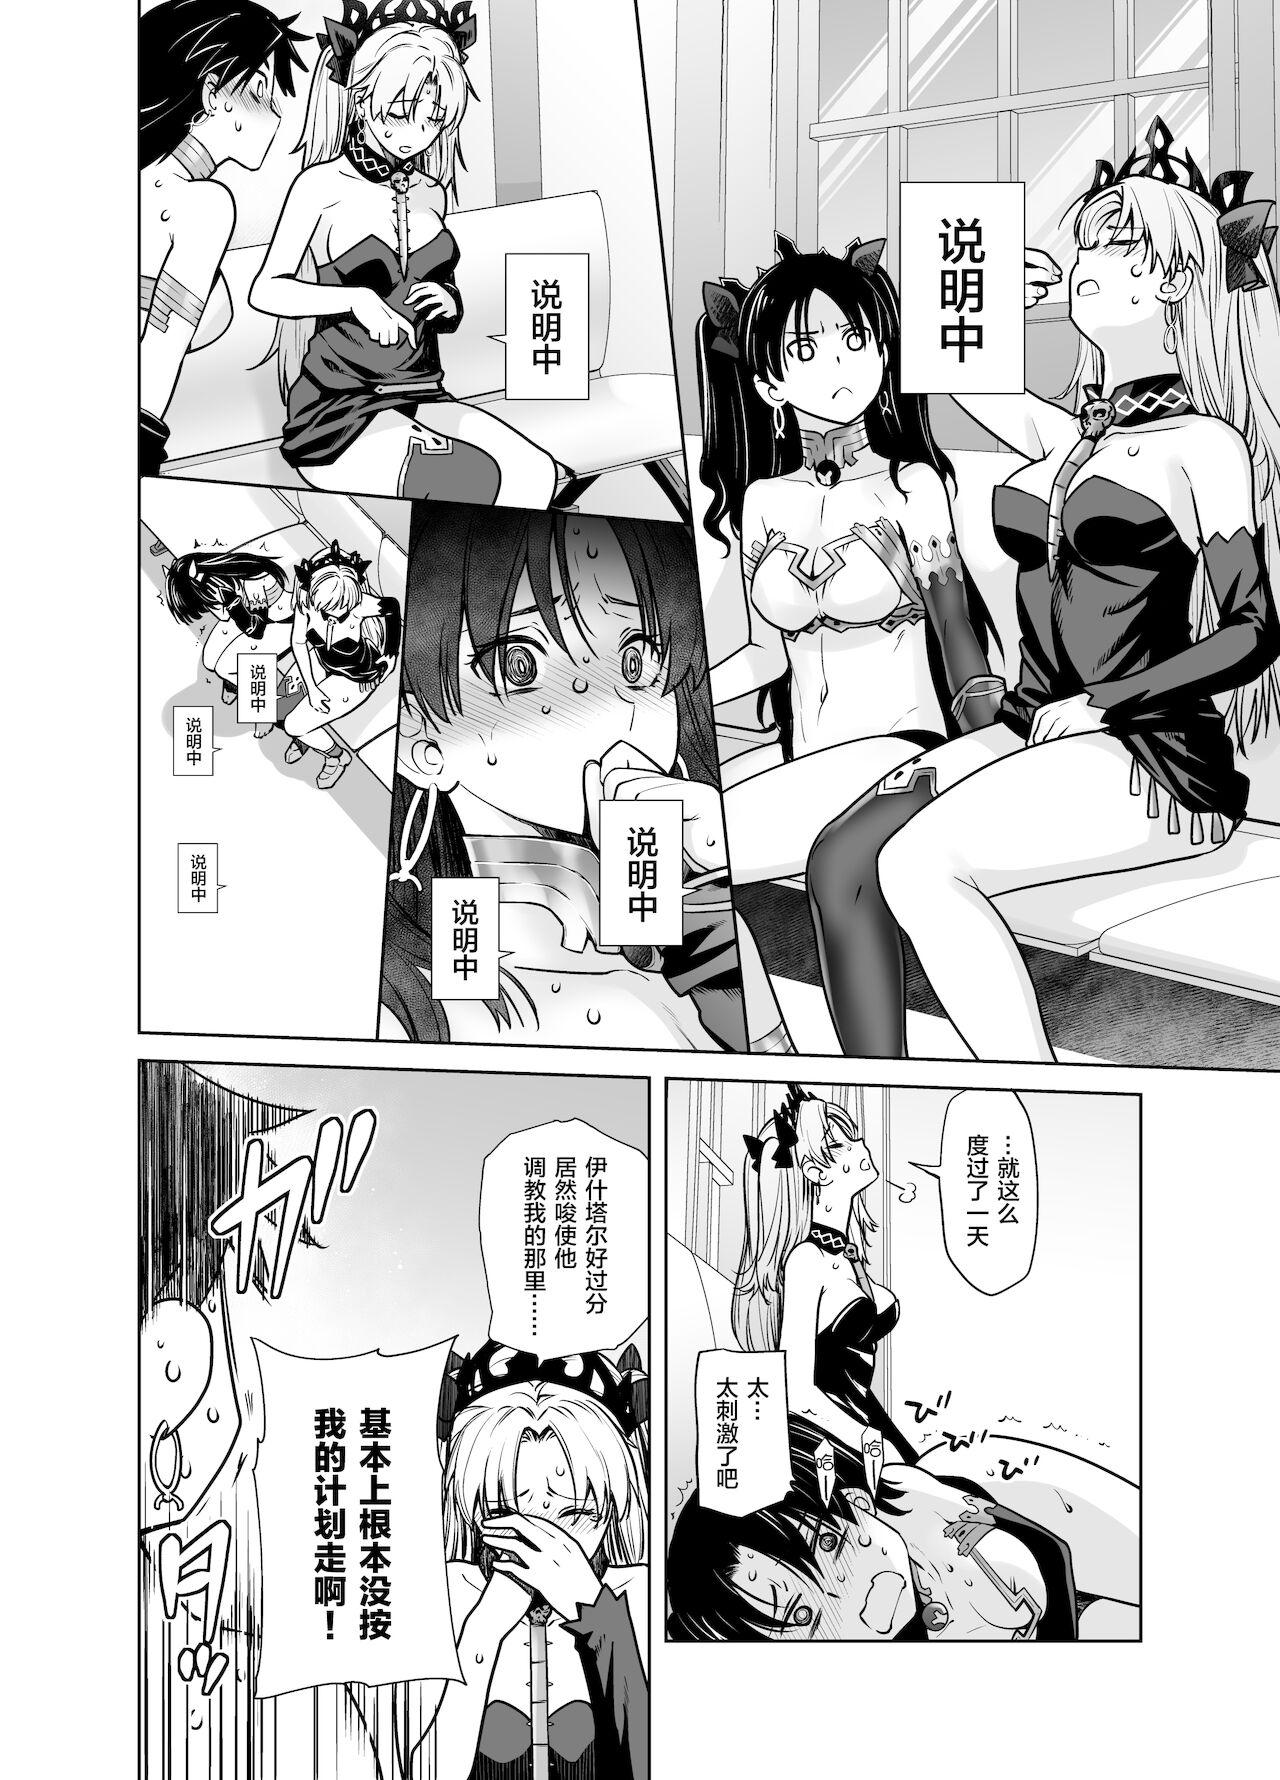 Pinay HEAVEN'S DRIVE 10 - Fate grand order This - Page 8